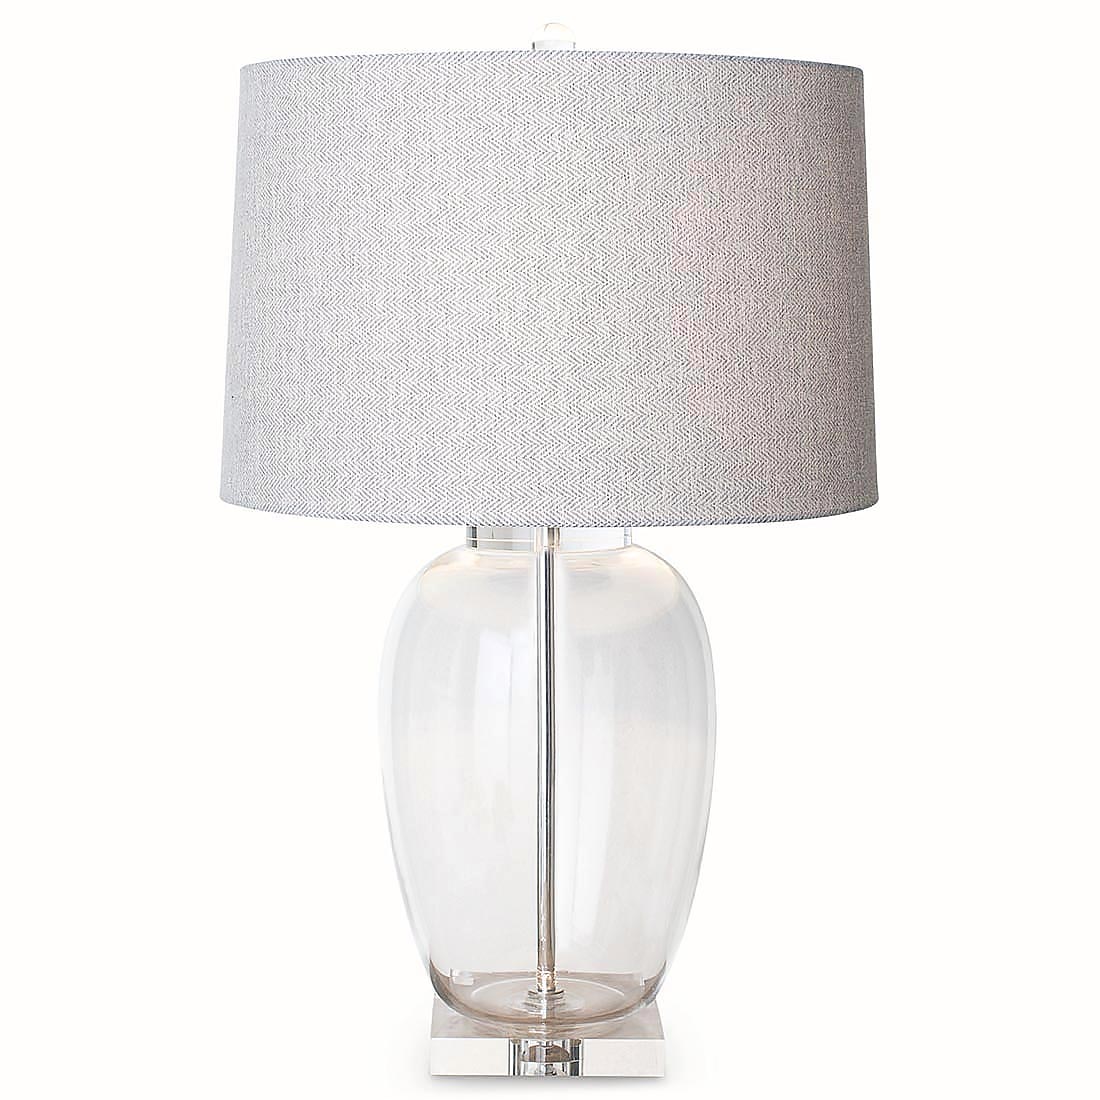 Oval Glass Table Lamp With Herringbone, Glass Table Lamp Shades Only